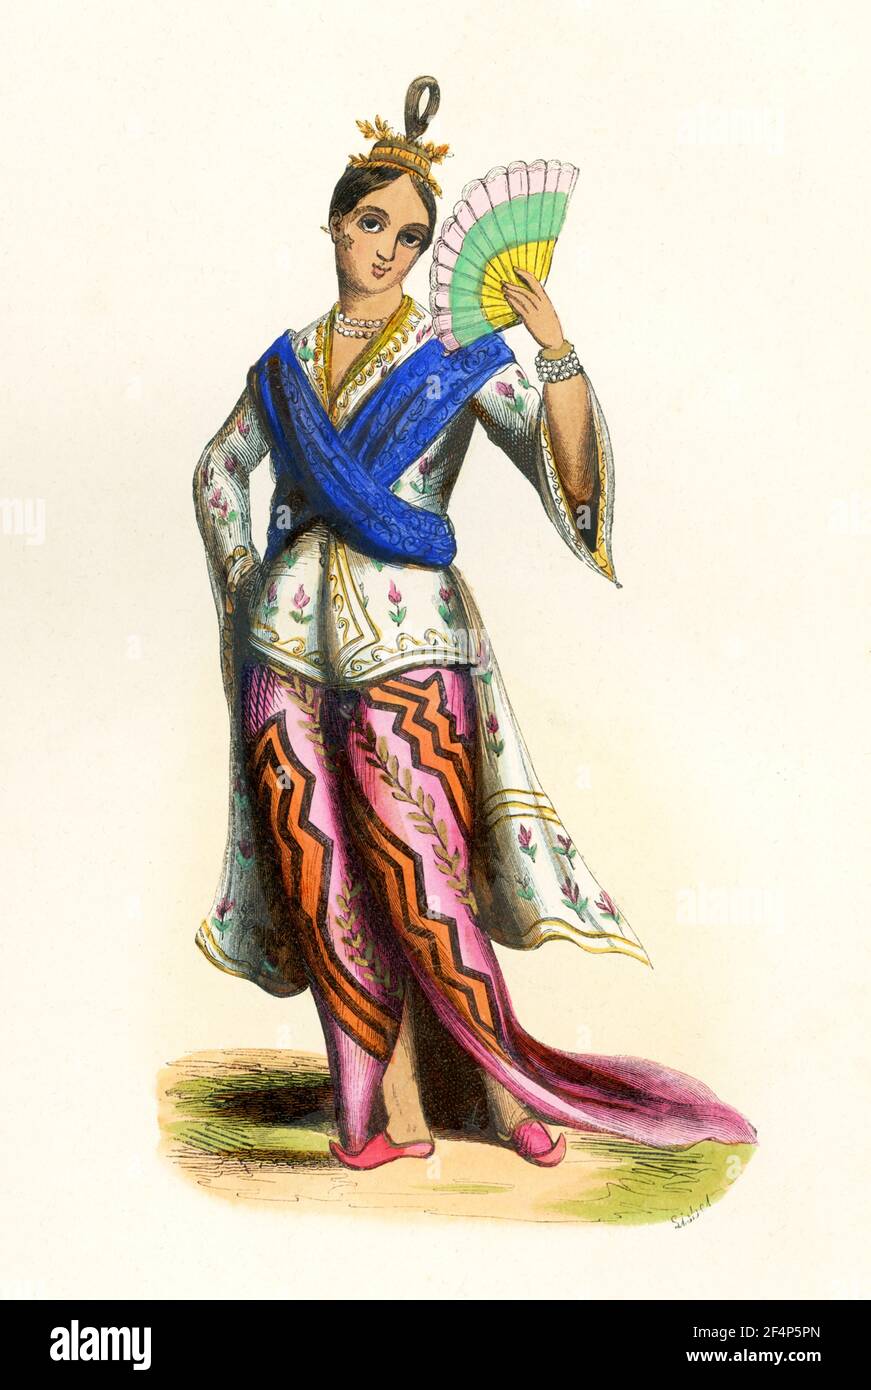 This 1840s illustration shows a noble from Burma, present-day Myanmar. Myanmar (formerly Burma) is a Southeast Asian nation of more than 100 ethnic groups, bordering India, Bangladesh, China, Laos and Thailand. Stock Photo